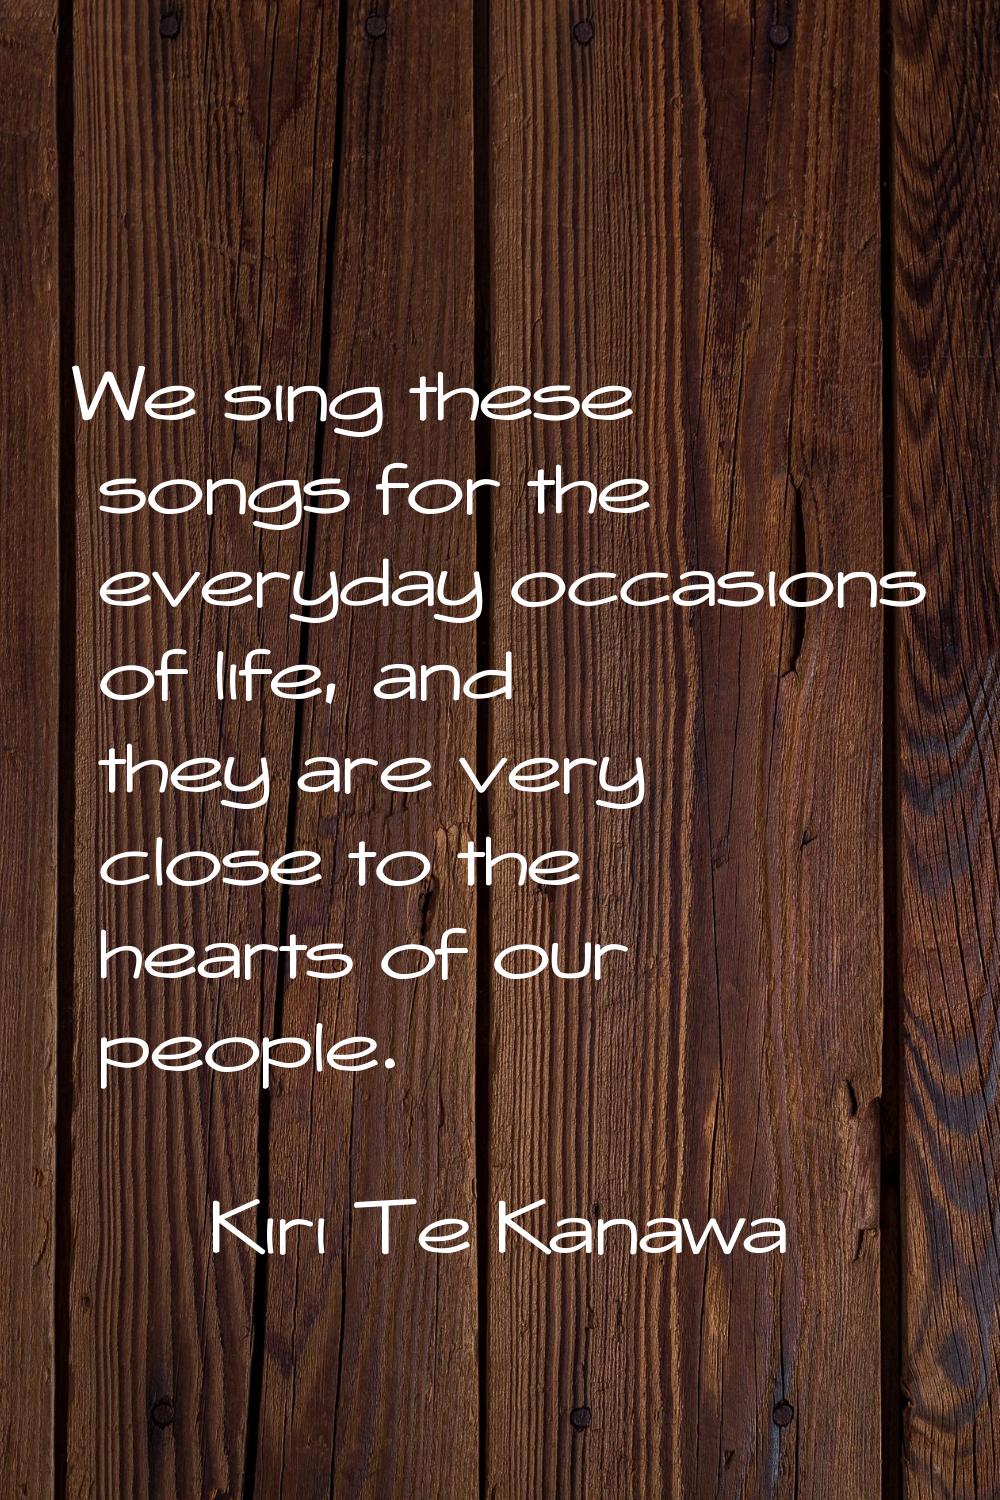 We sing these songs for the everyday occasions of life, and they are very close to the hearts of ou